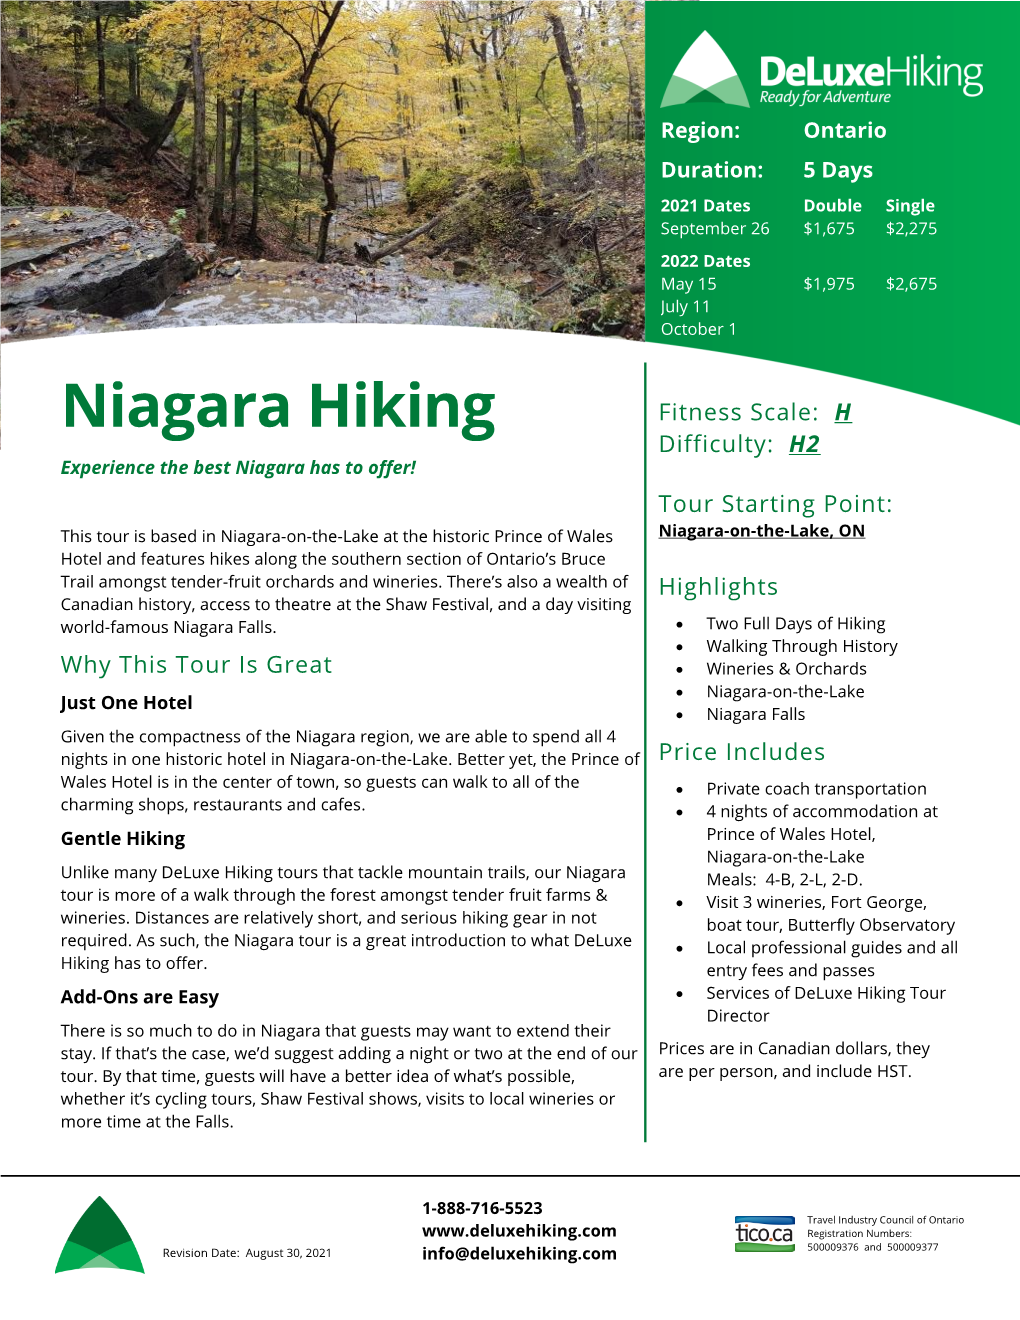 Niagara Hiking Fitness Scale: H Difficulty: H2 Experience the Best Niagara Has to Offer!